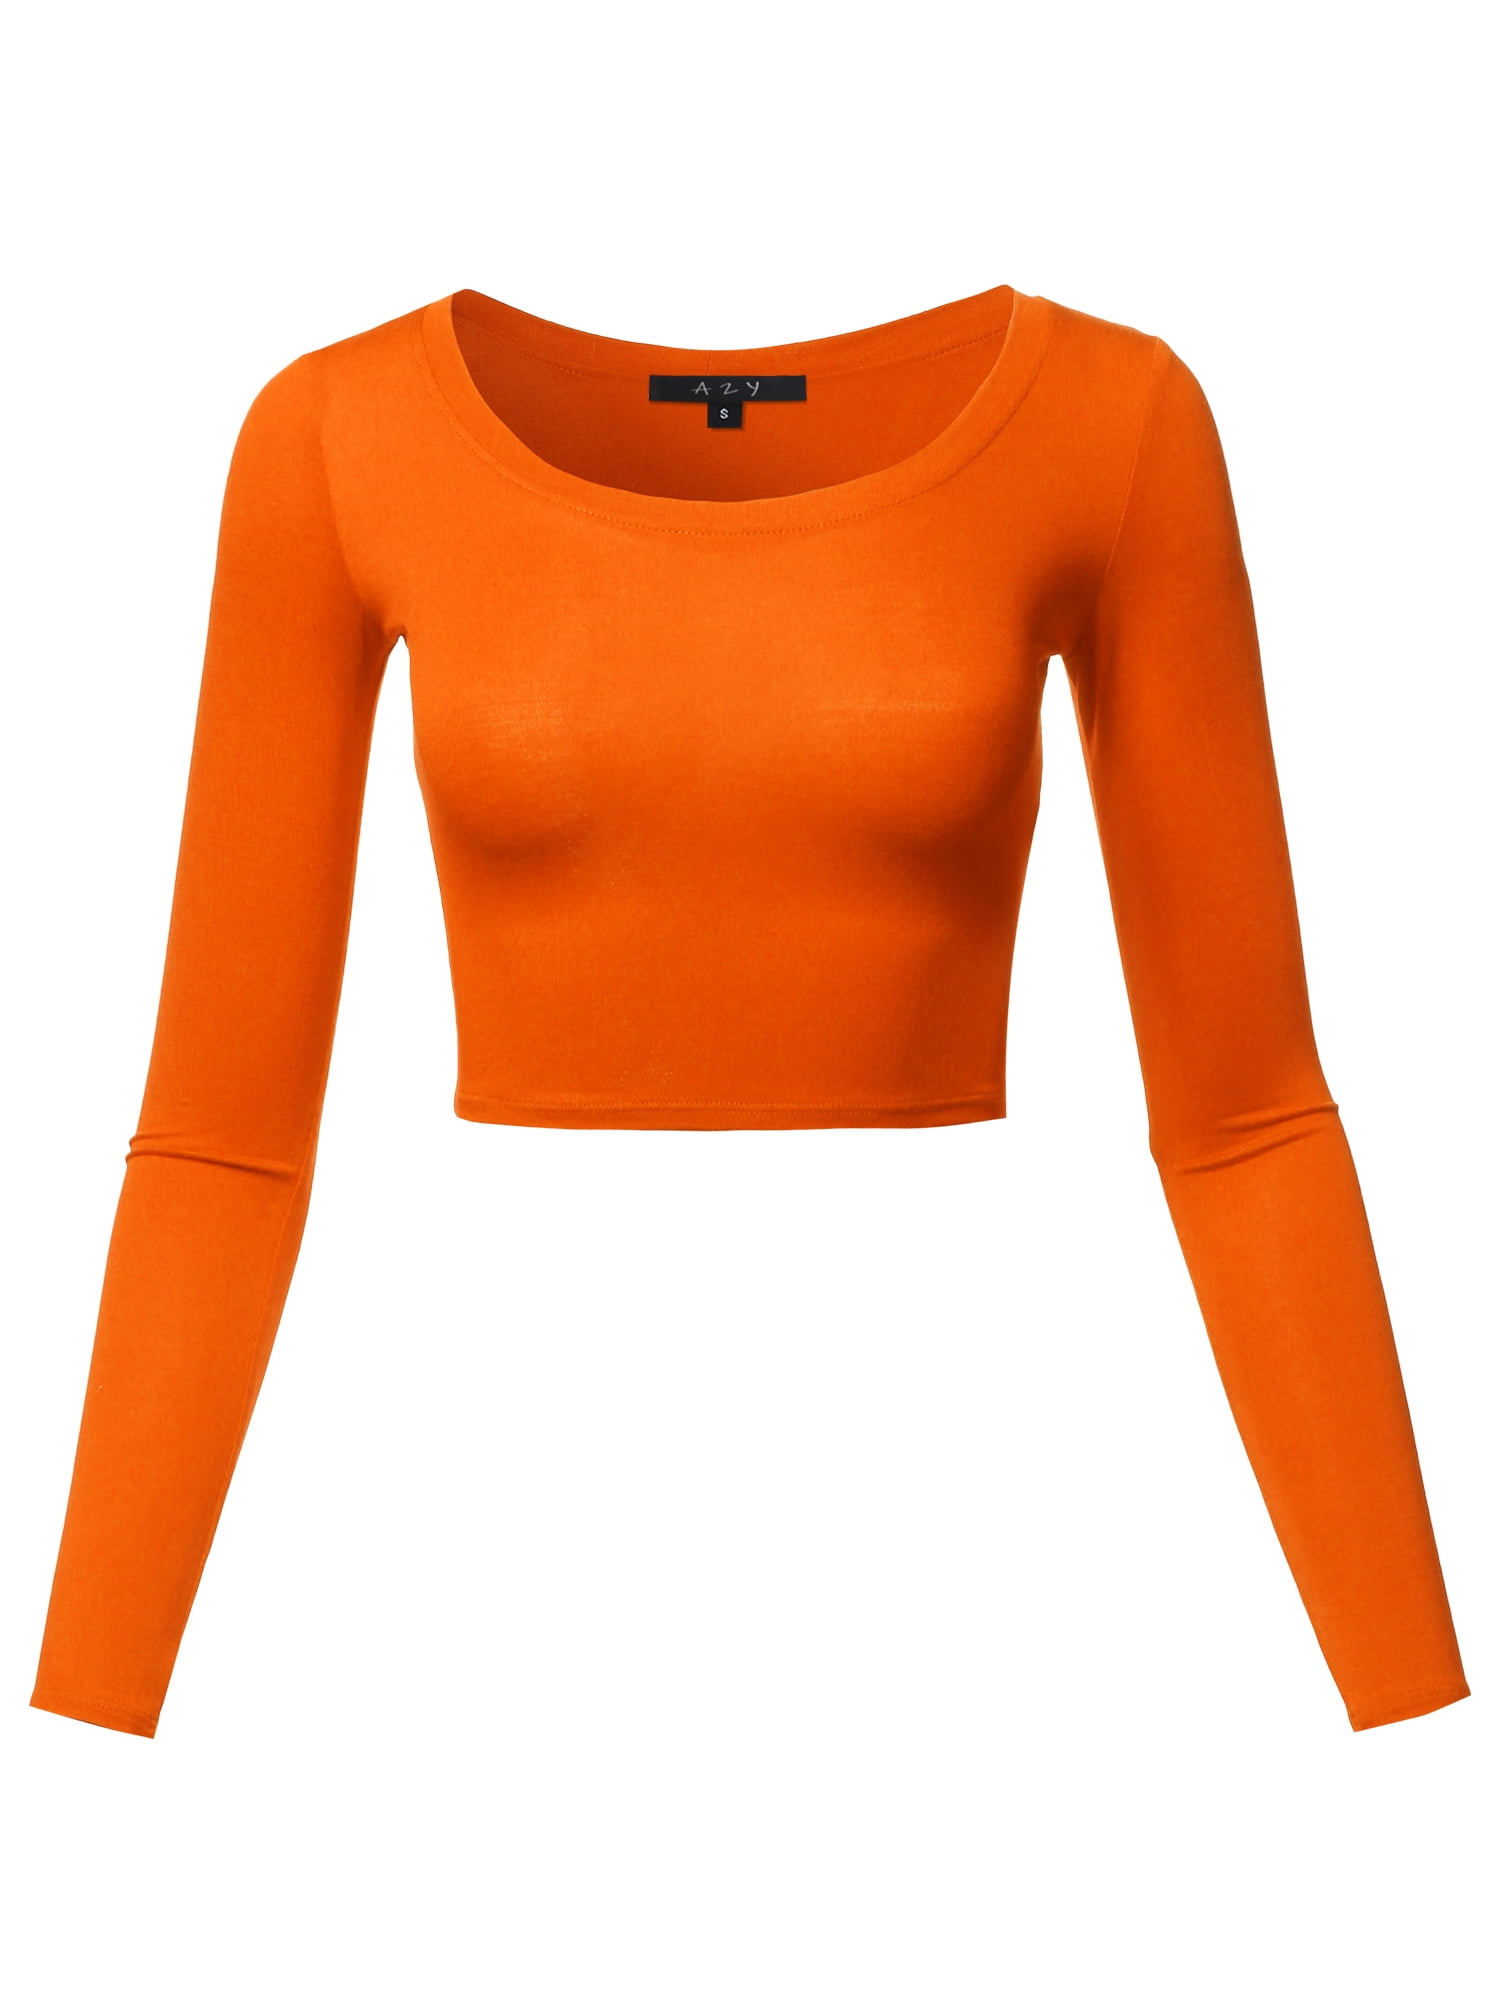 A2Y Women's Basic Solid Stretchable Scoop Neck Long Sleeve Crop Top Orange S